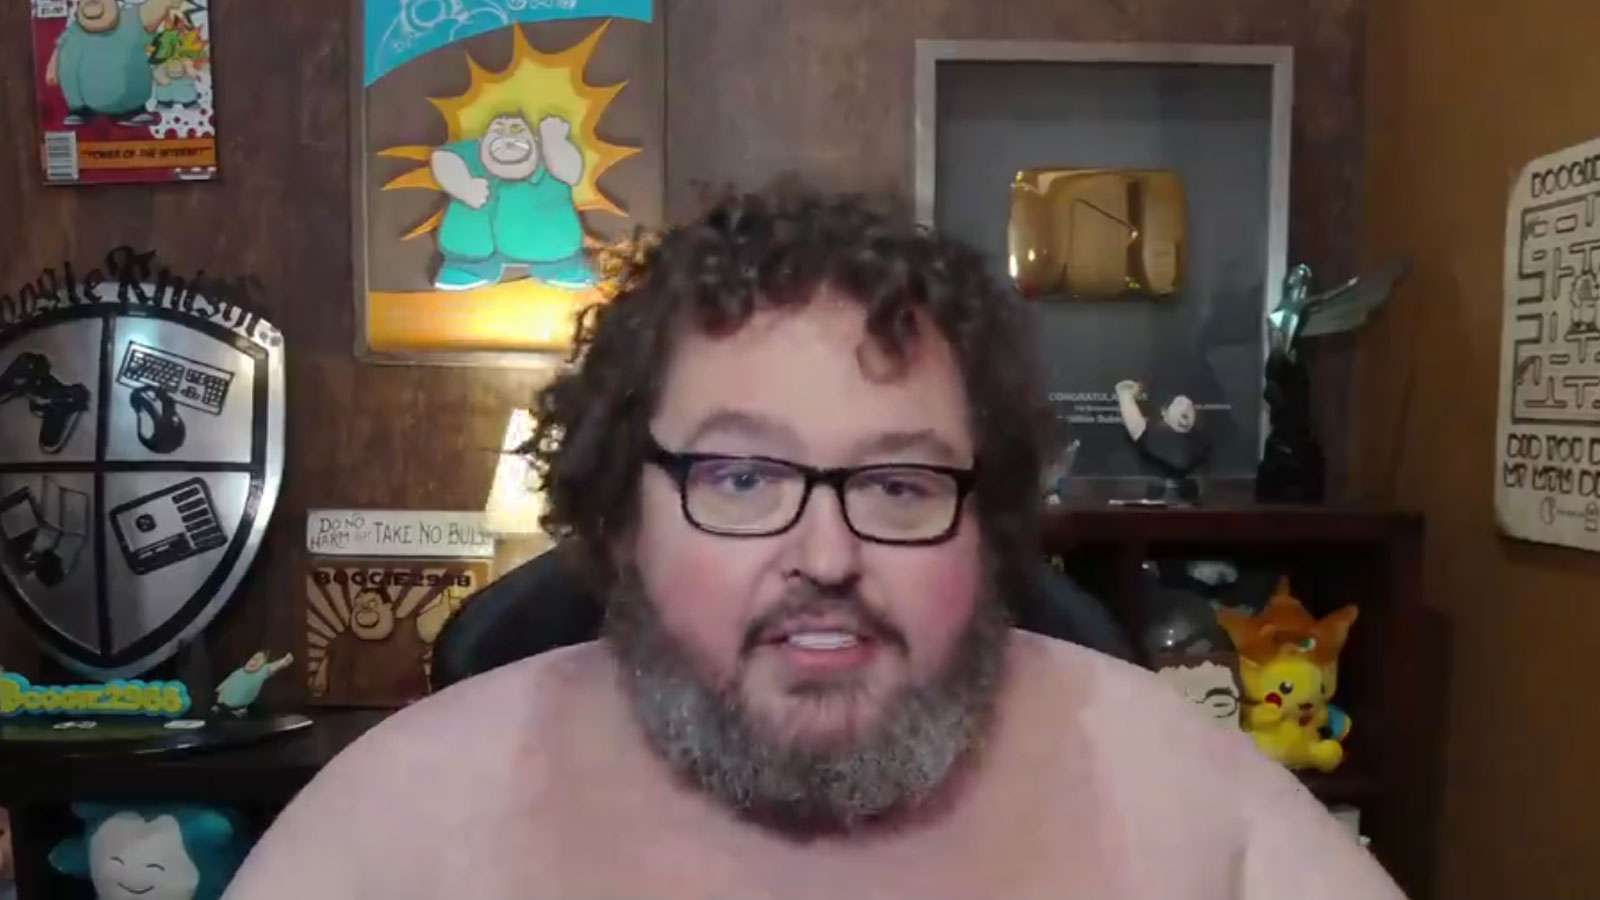 Boogie2988 sat at desk with his shirt off